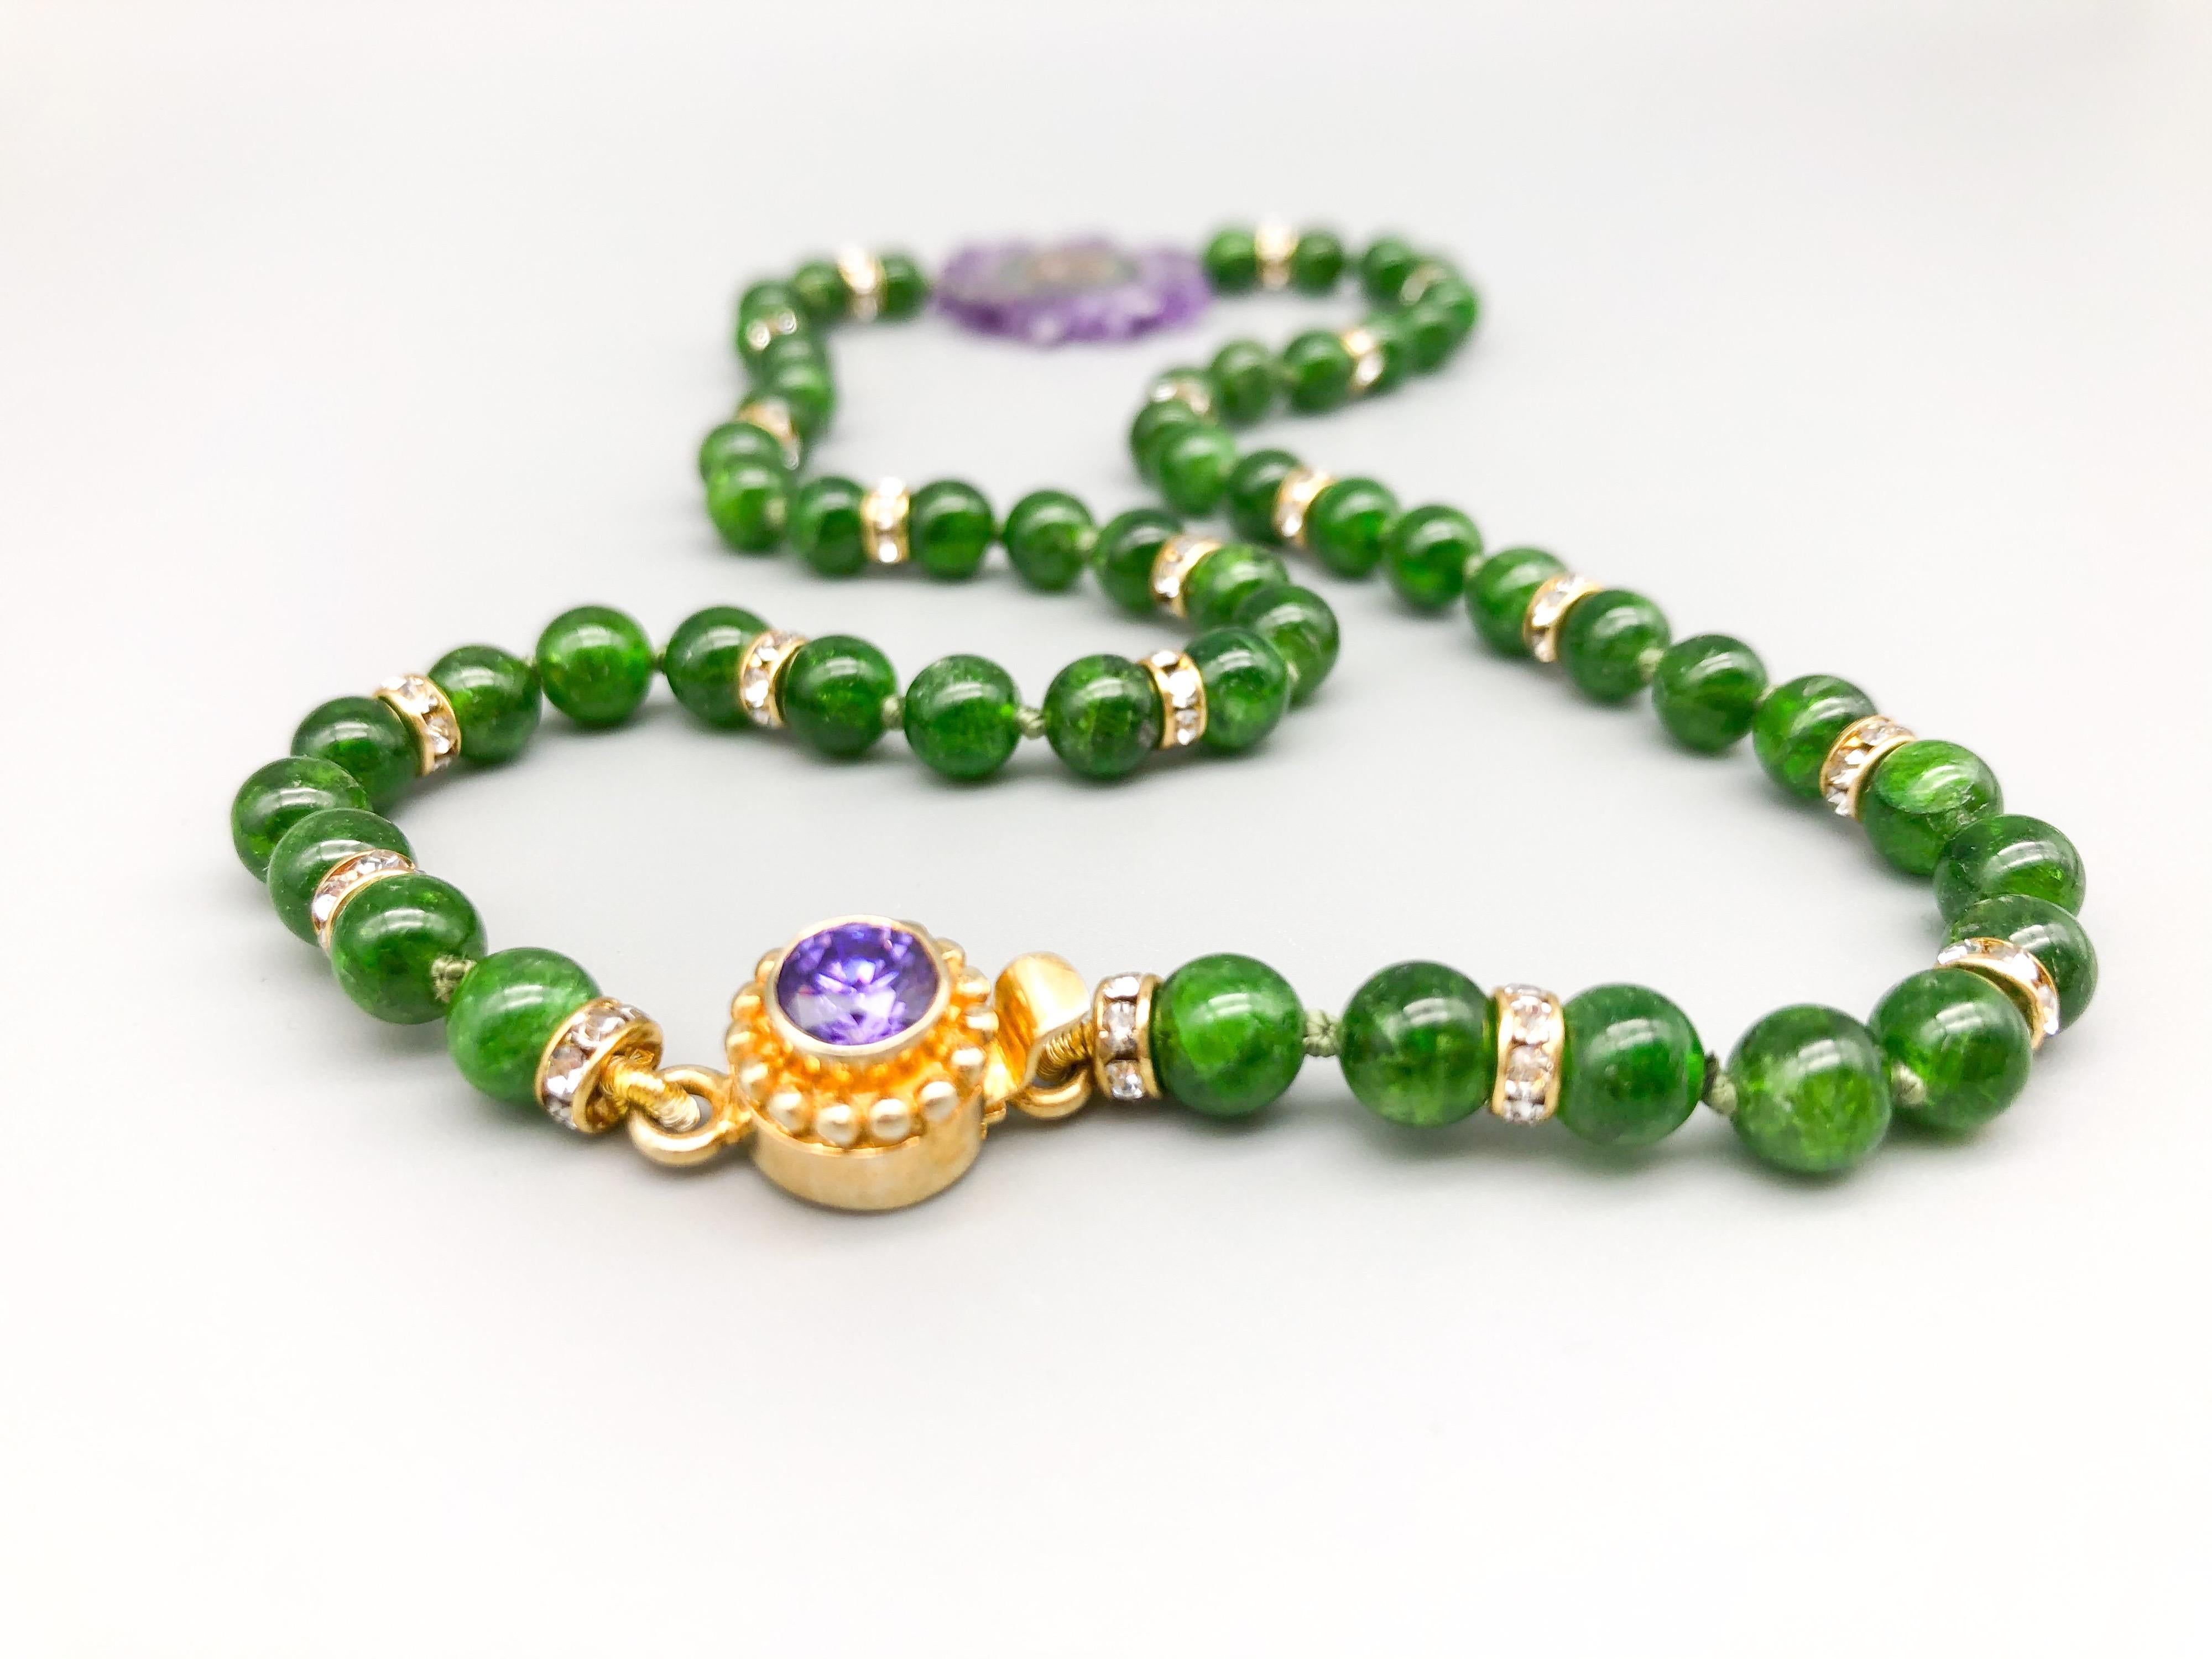 Mixed Cut A.Jeschel Chrome Diopside beads with an Amethyst Stalactite Pendant. For Sale